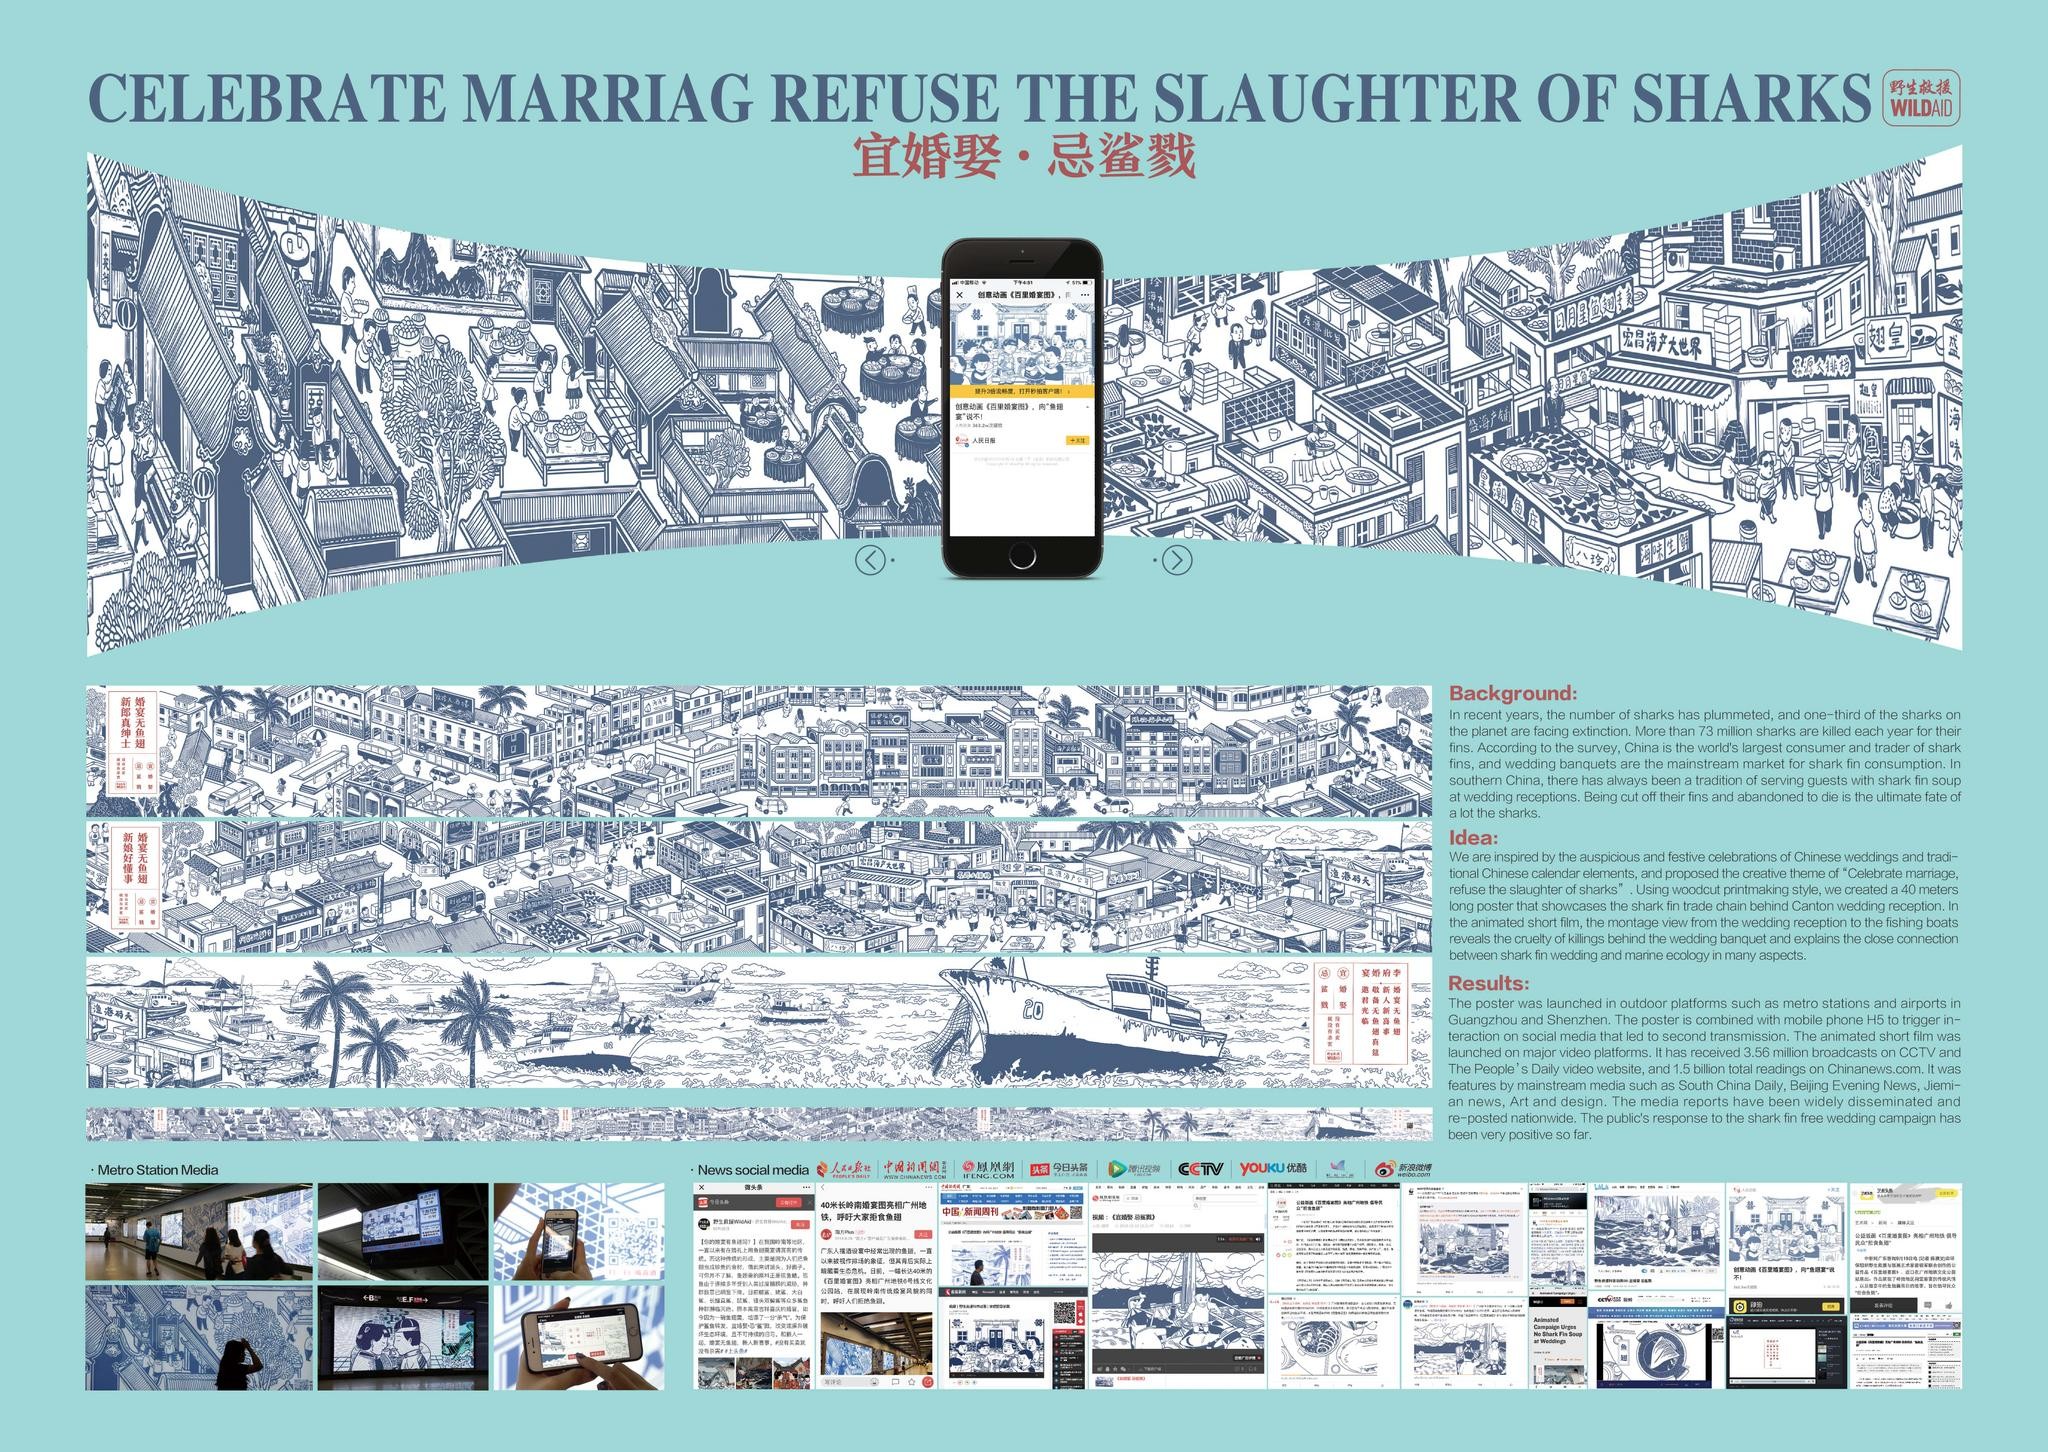 Celebrate marriage, refuse the slaughter of sharks